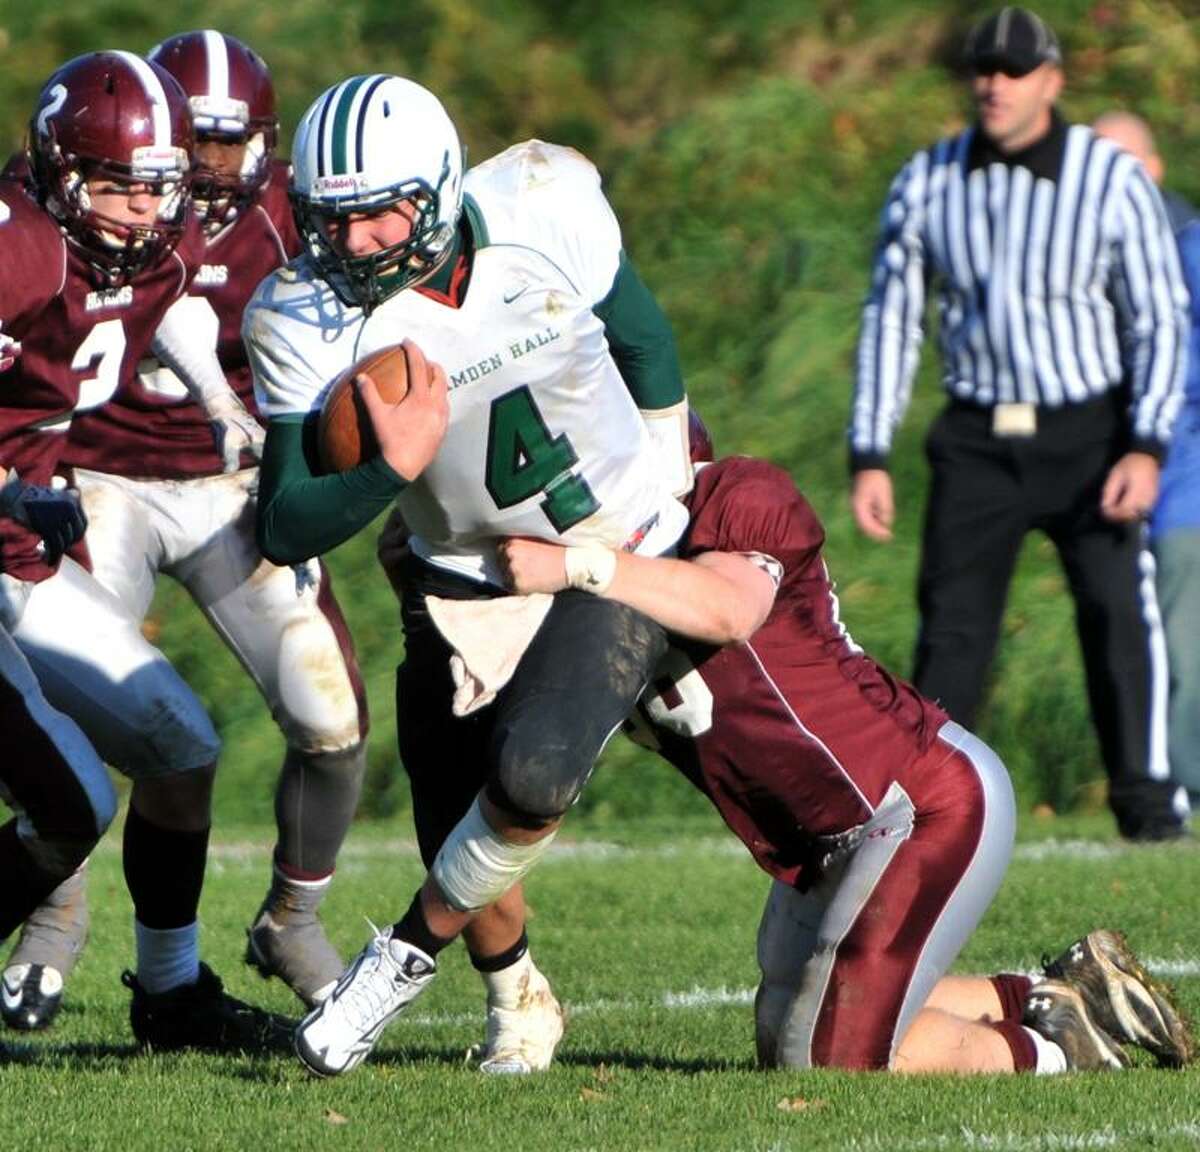 T.J. Linta of Hamden Hall gets tackled behind the line of scrimmage by Gordon Driscoll of Hopkins during the overtime period of football action Saturday 11/12/11 at Hopkins. Photo by Peter Hvizdak / New Haven Register November 12, 2011 ph2406 Connecticut